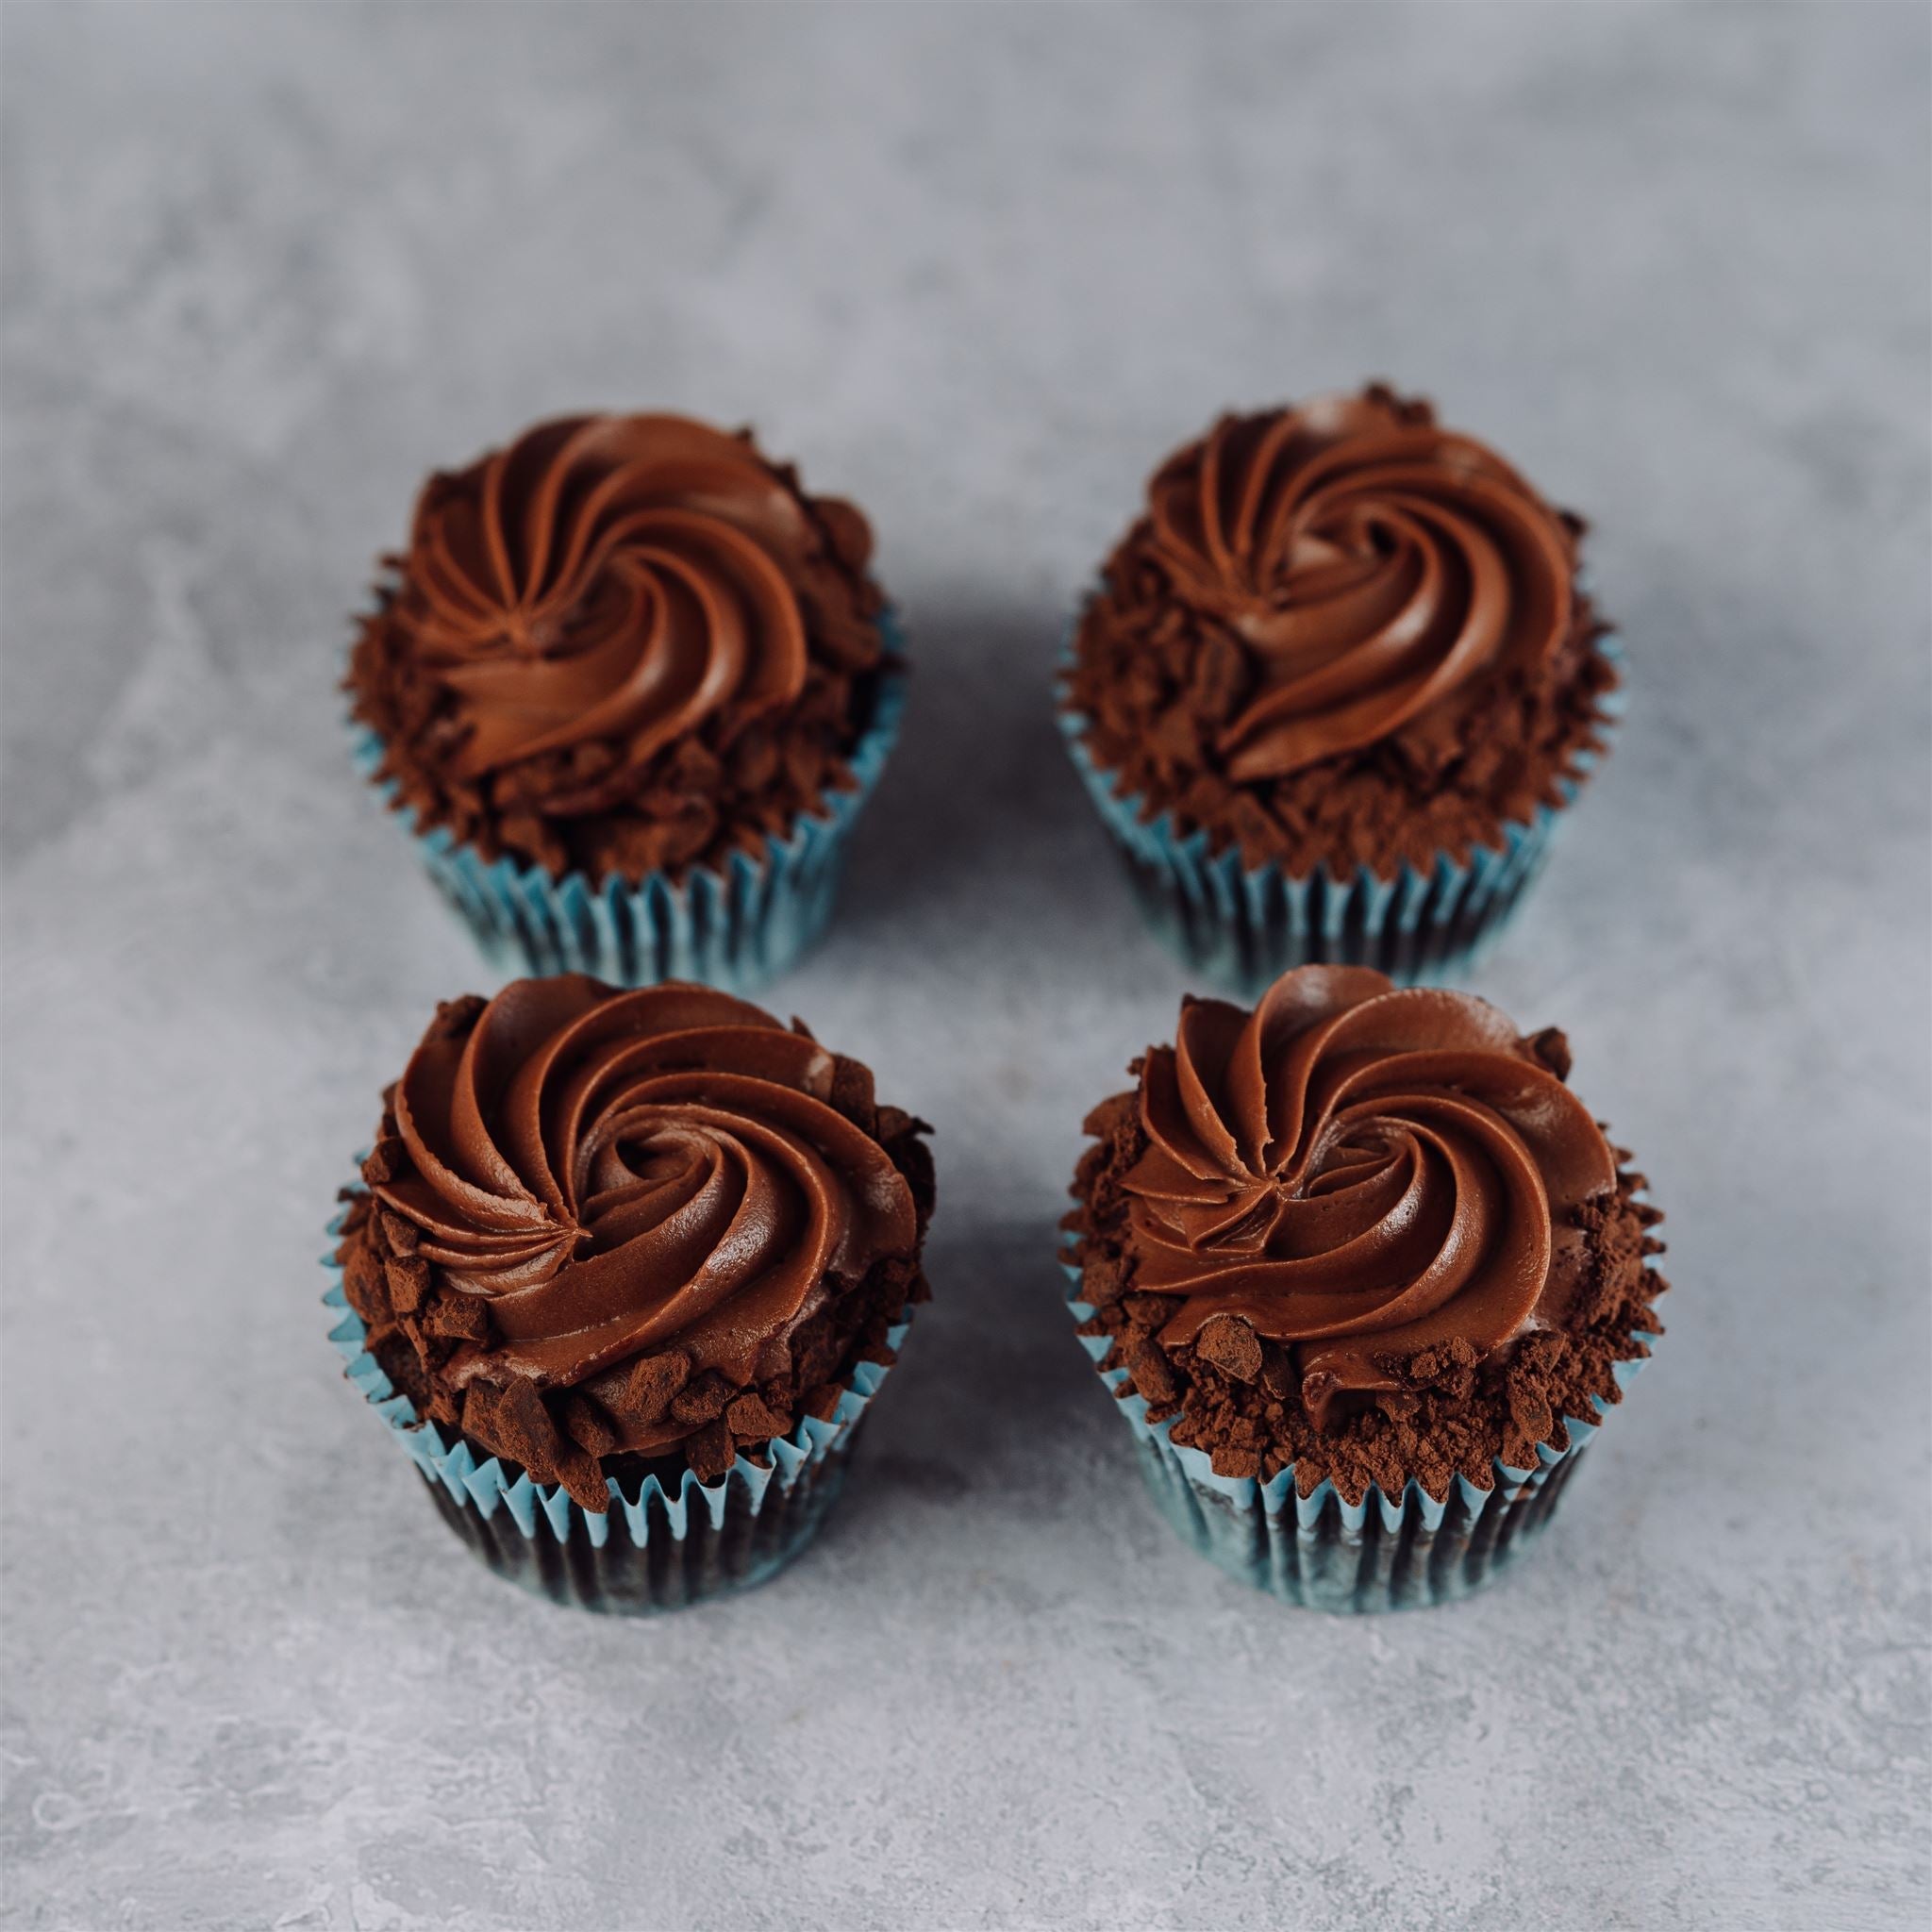 Chocolate Cupcakes (Free from Gluten) - Jack and Beyond